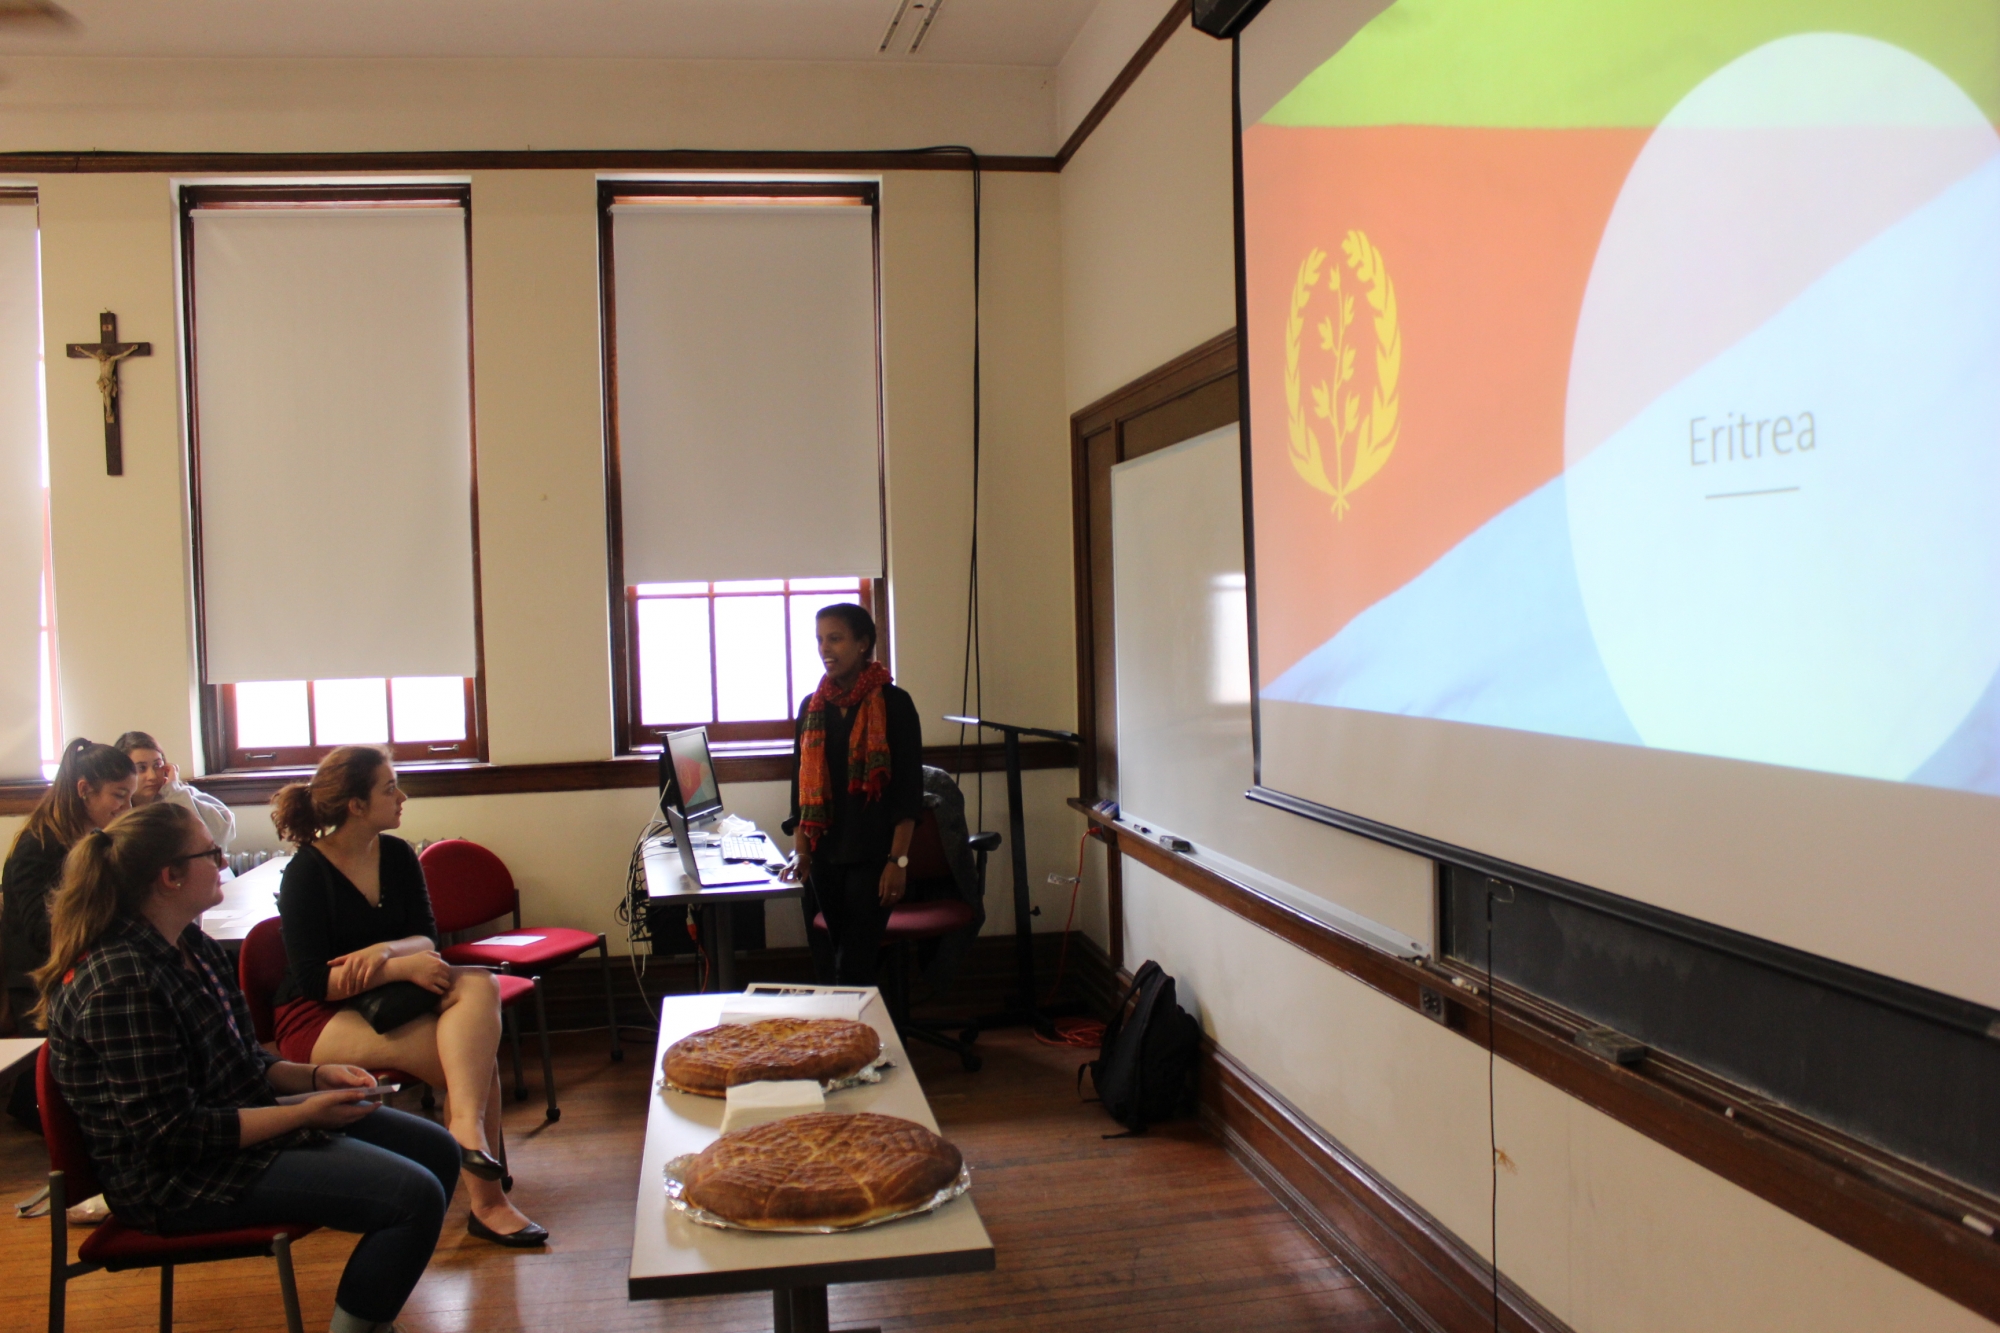 Liz Legesse shared her presentation on her home country of Eritrea as part of the Global Education Office's "Travels at Teatime."